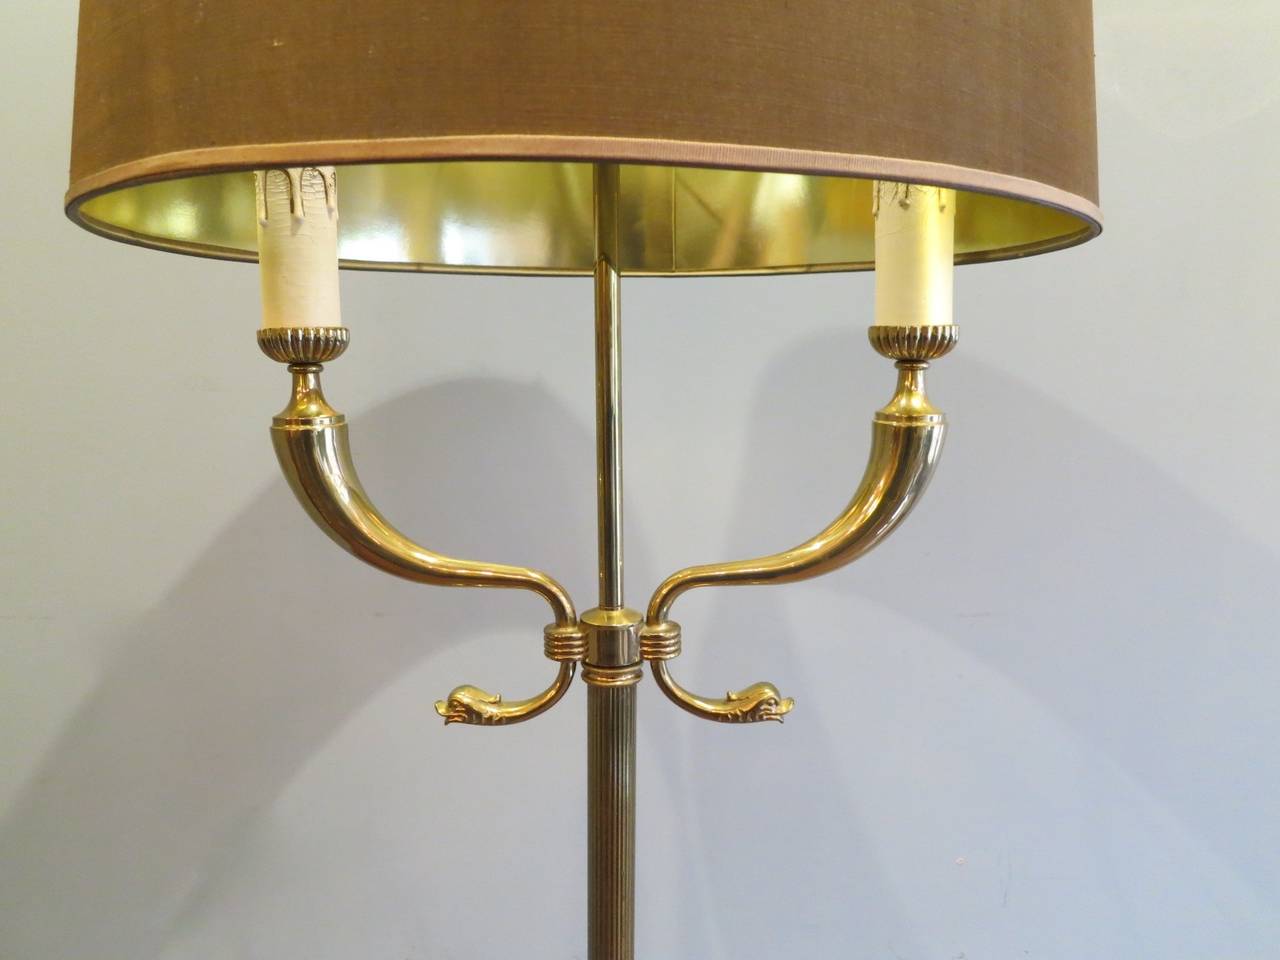 A large twin arm brass neoclassical style floor lamp, with Triton head arms brass base with inline switch and top fitting finial shade in bronze/gold color.